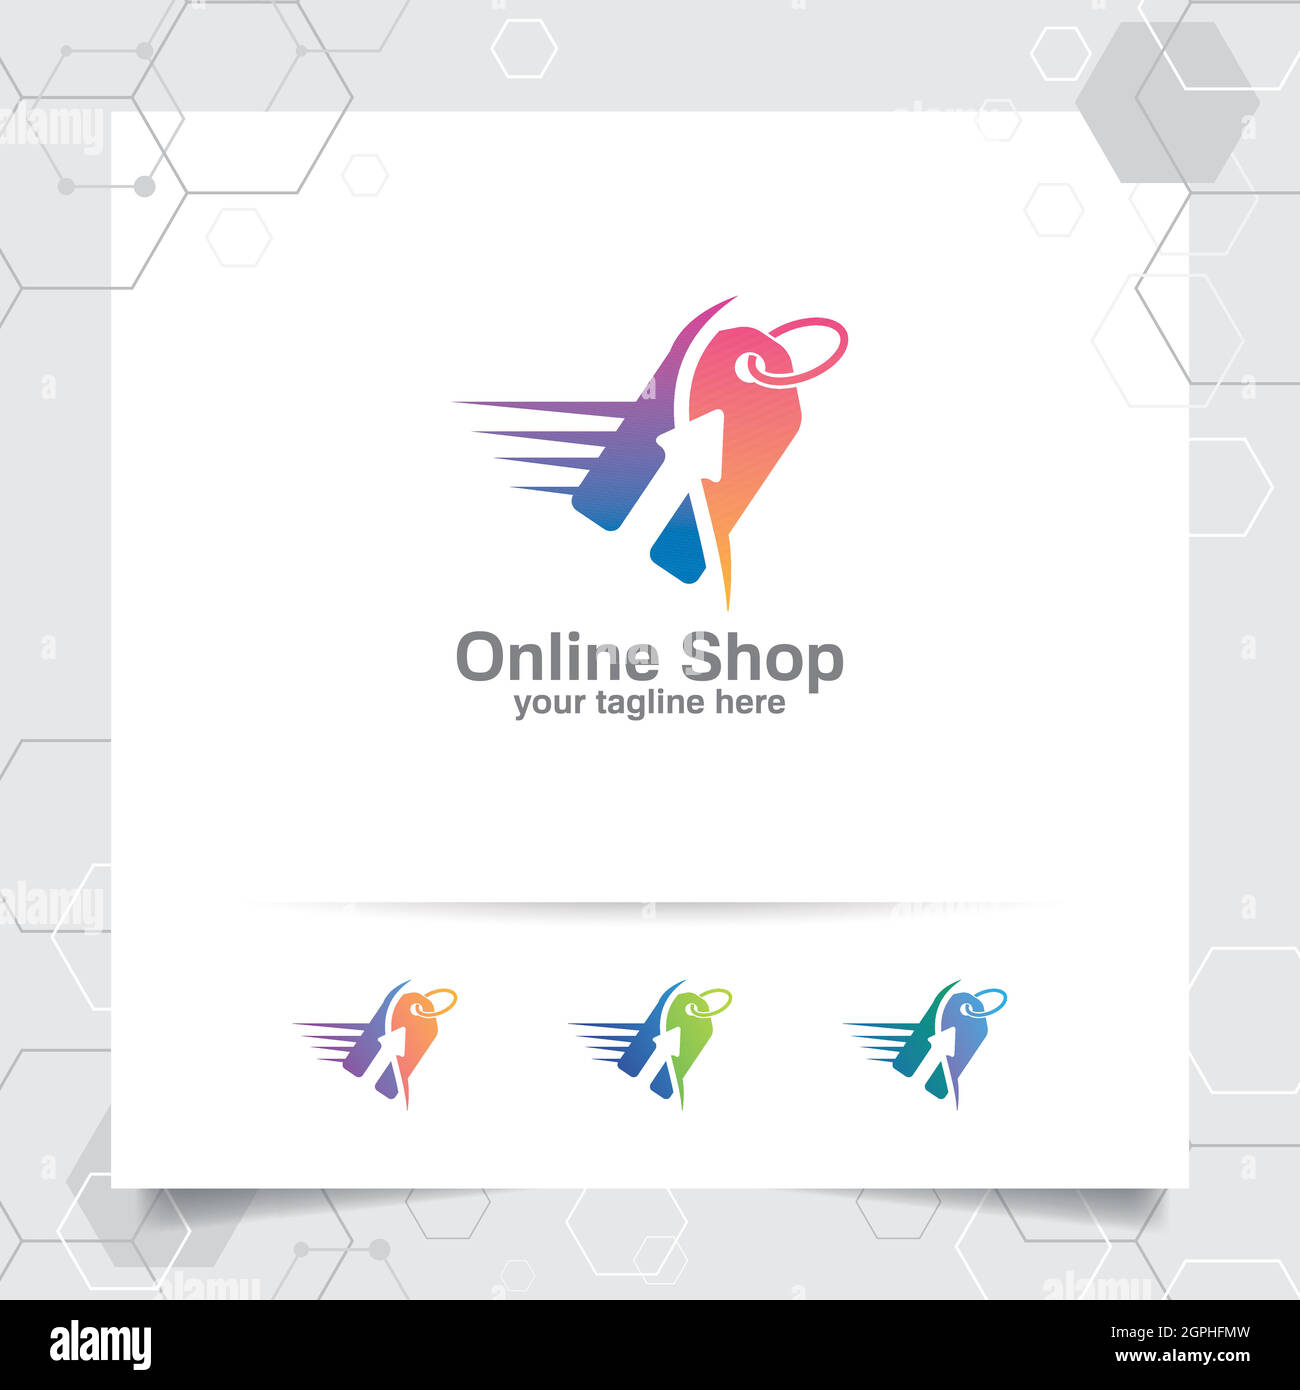 Shopping logo design vector concept of price tag icon and arrow symbol for online shop, marketplace, e-commerce, and online store. Stock Vector